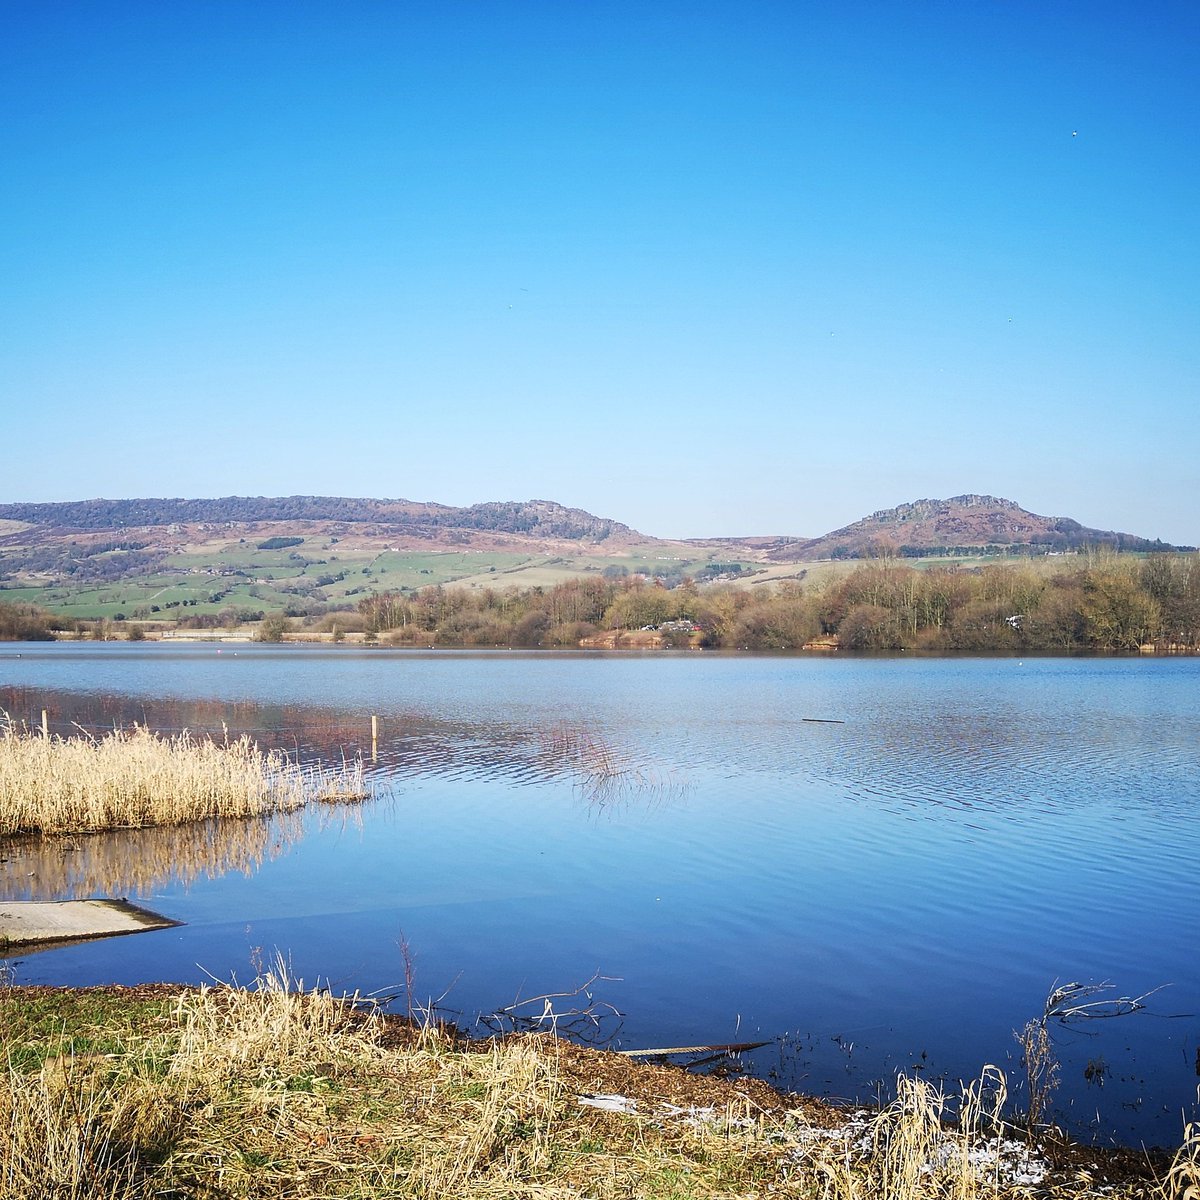 Wander around Tittesworth and Meerbrook in the spring sunshine. #staffordshiremoorlands